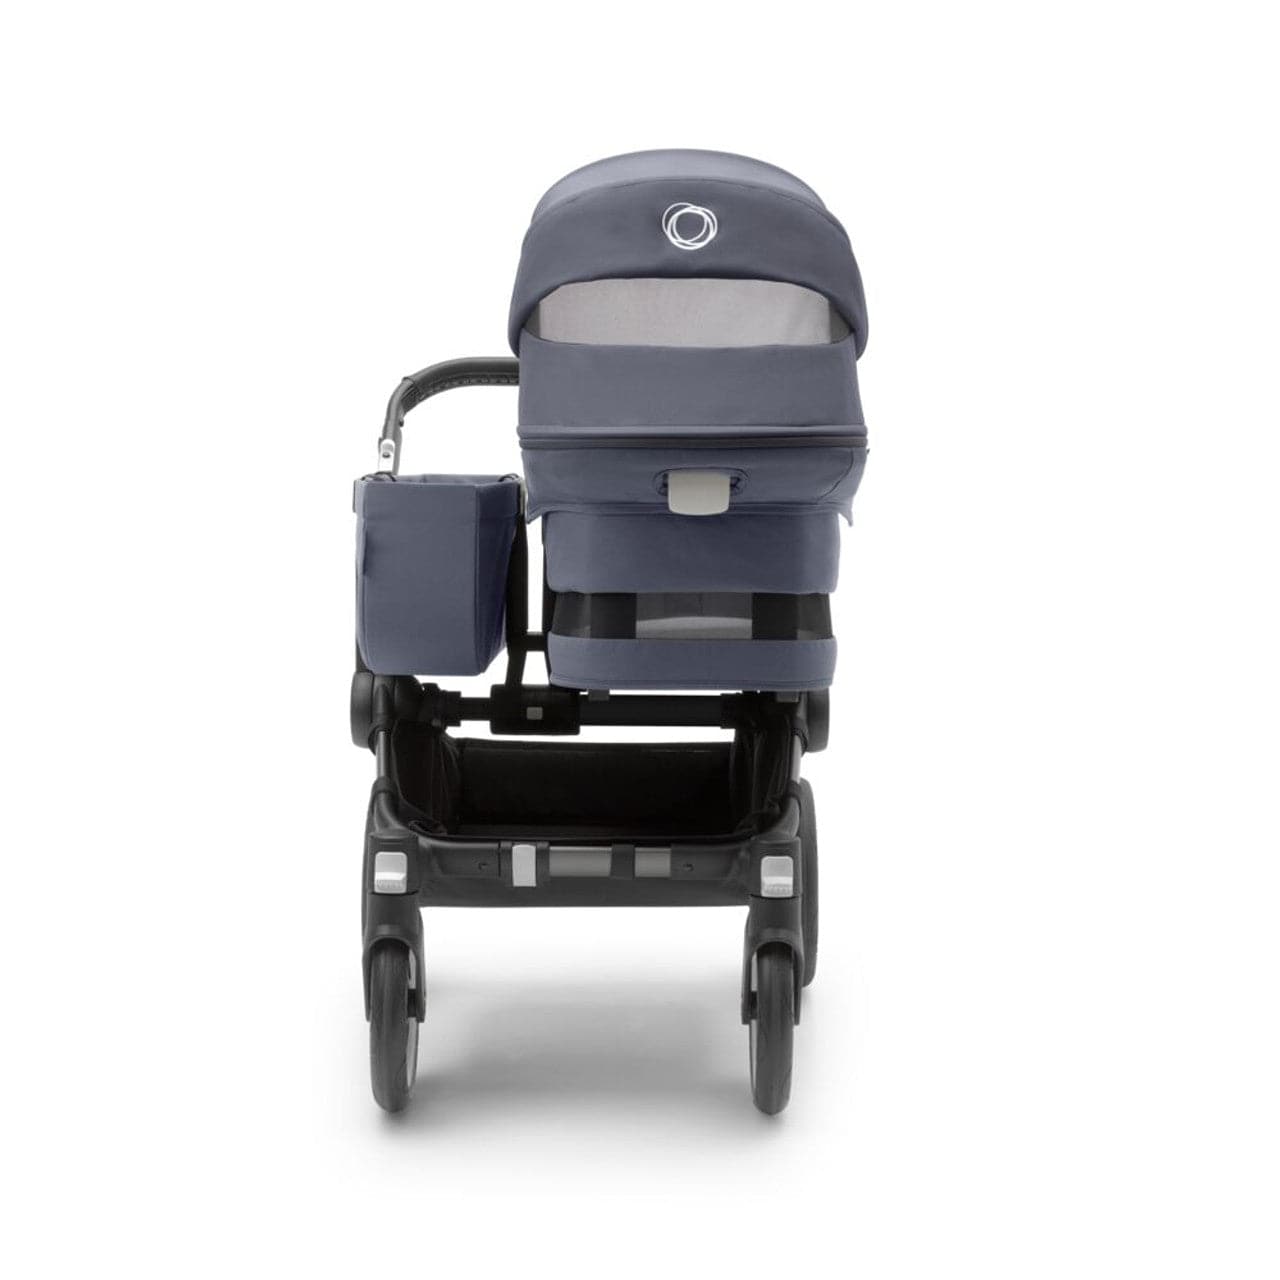 Bugaboo Donkey 5 Duo Pushchair on Black/Black Chassis - Choose Your Colour - For Your Little One